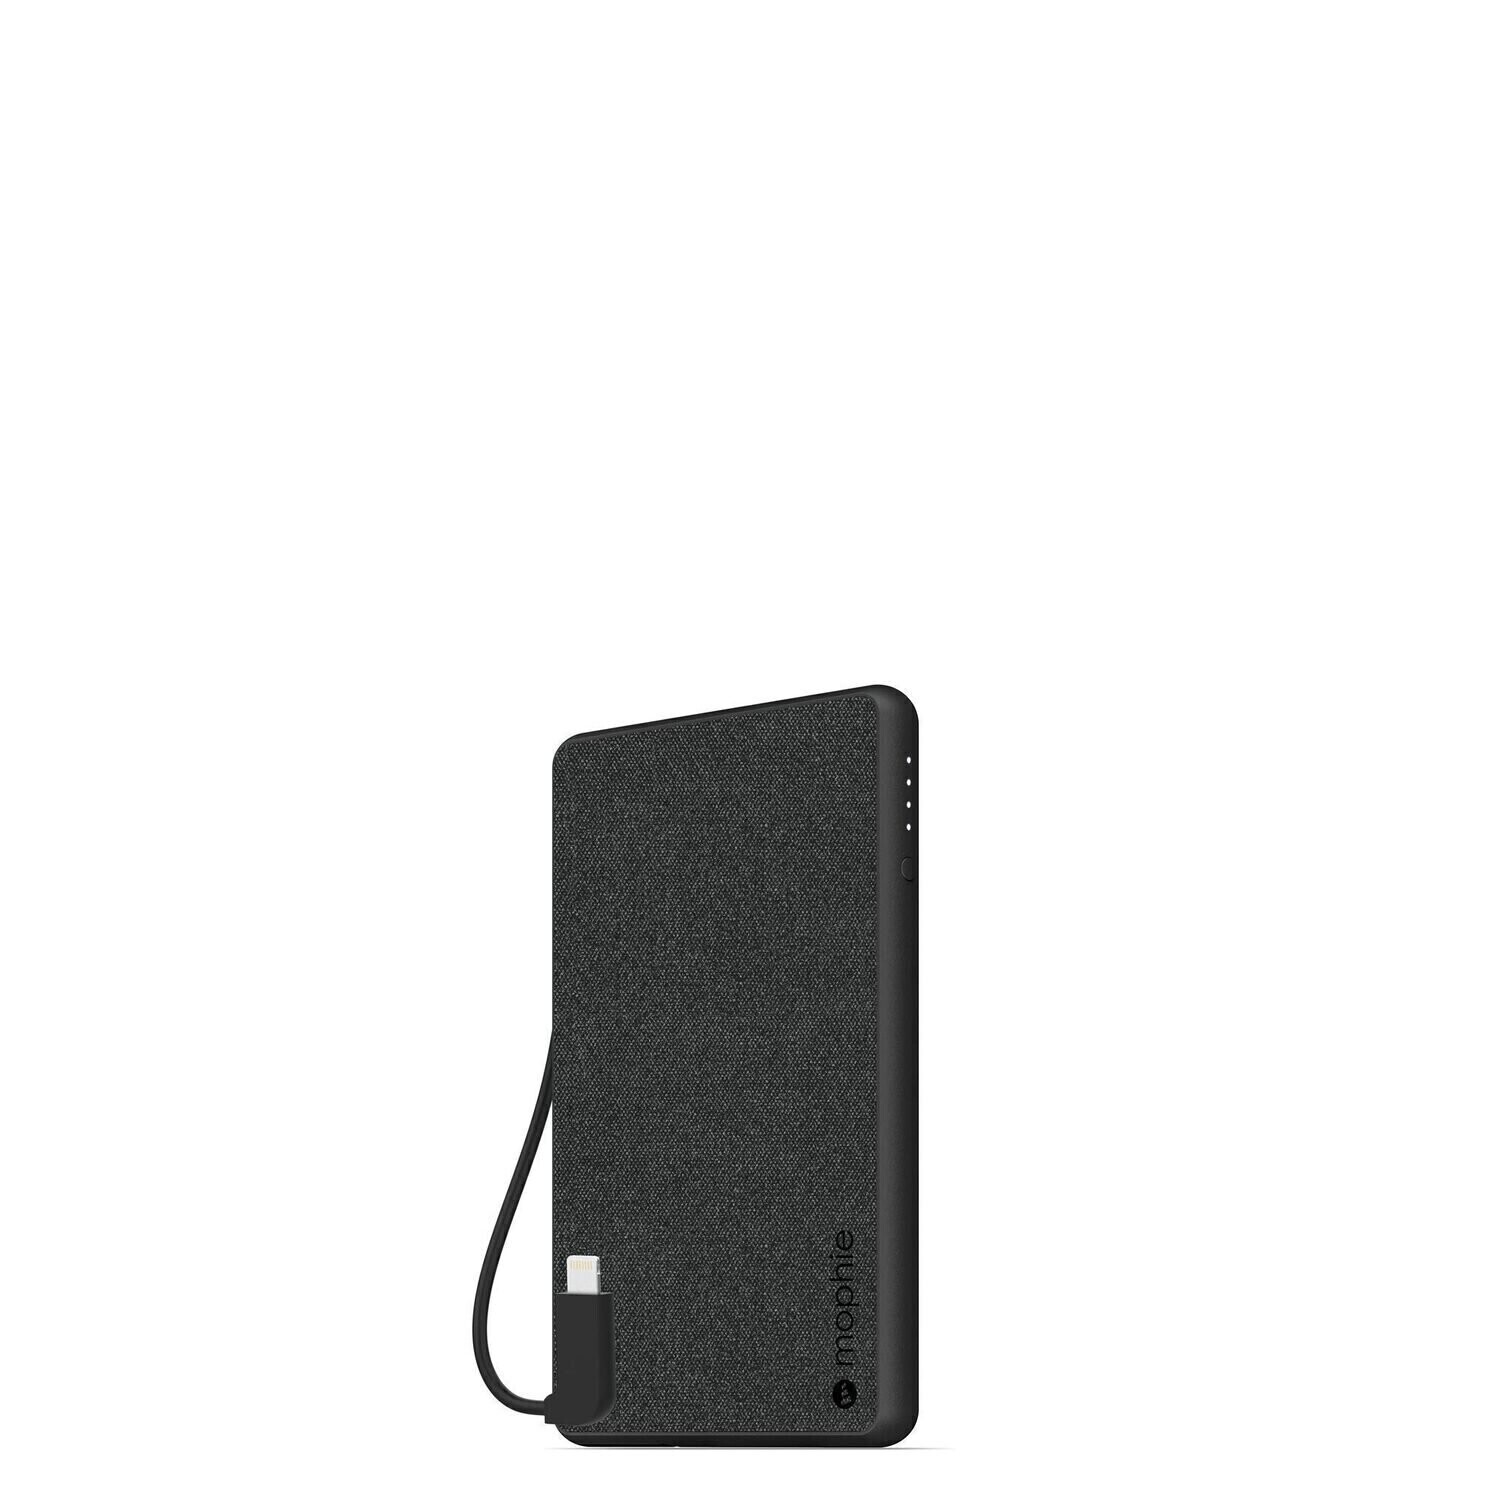 Mophie Powerstation Plus External Battery Switch-Tip-Cable (4,000mAh) (G4), Black